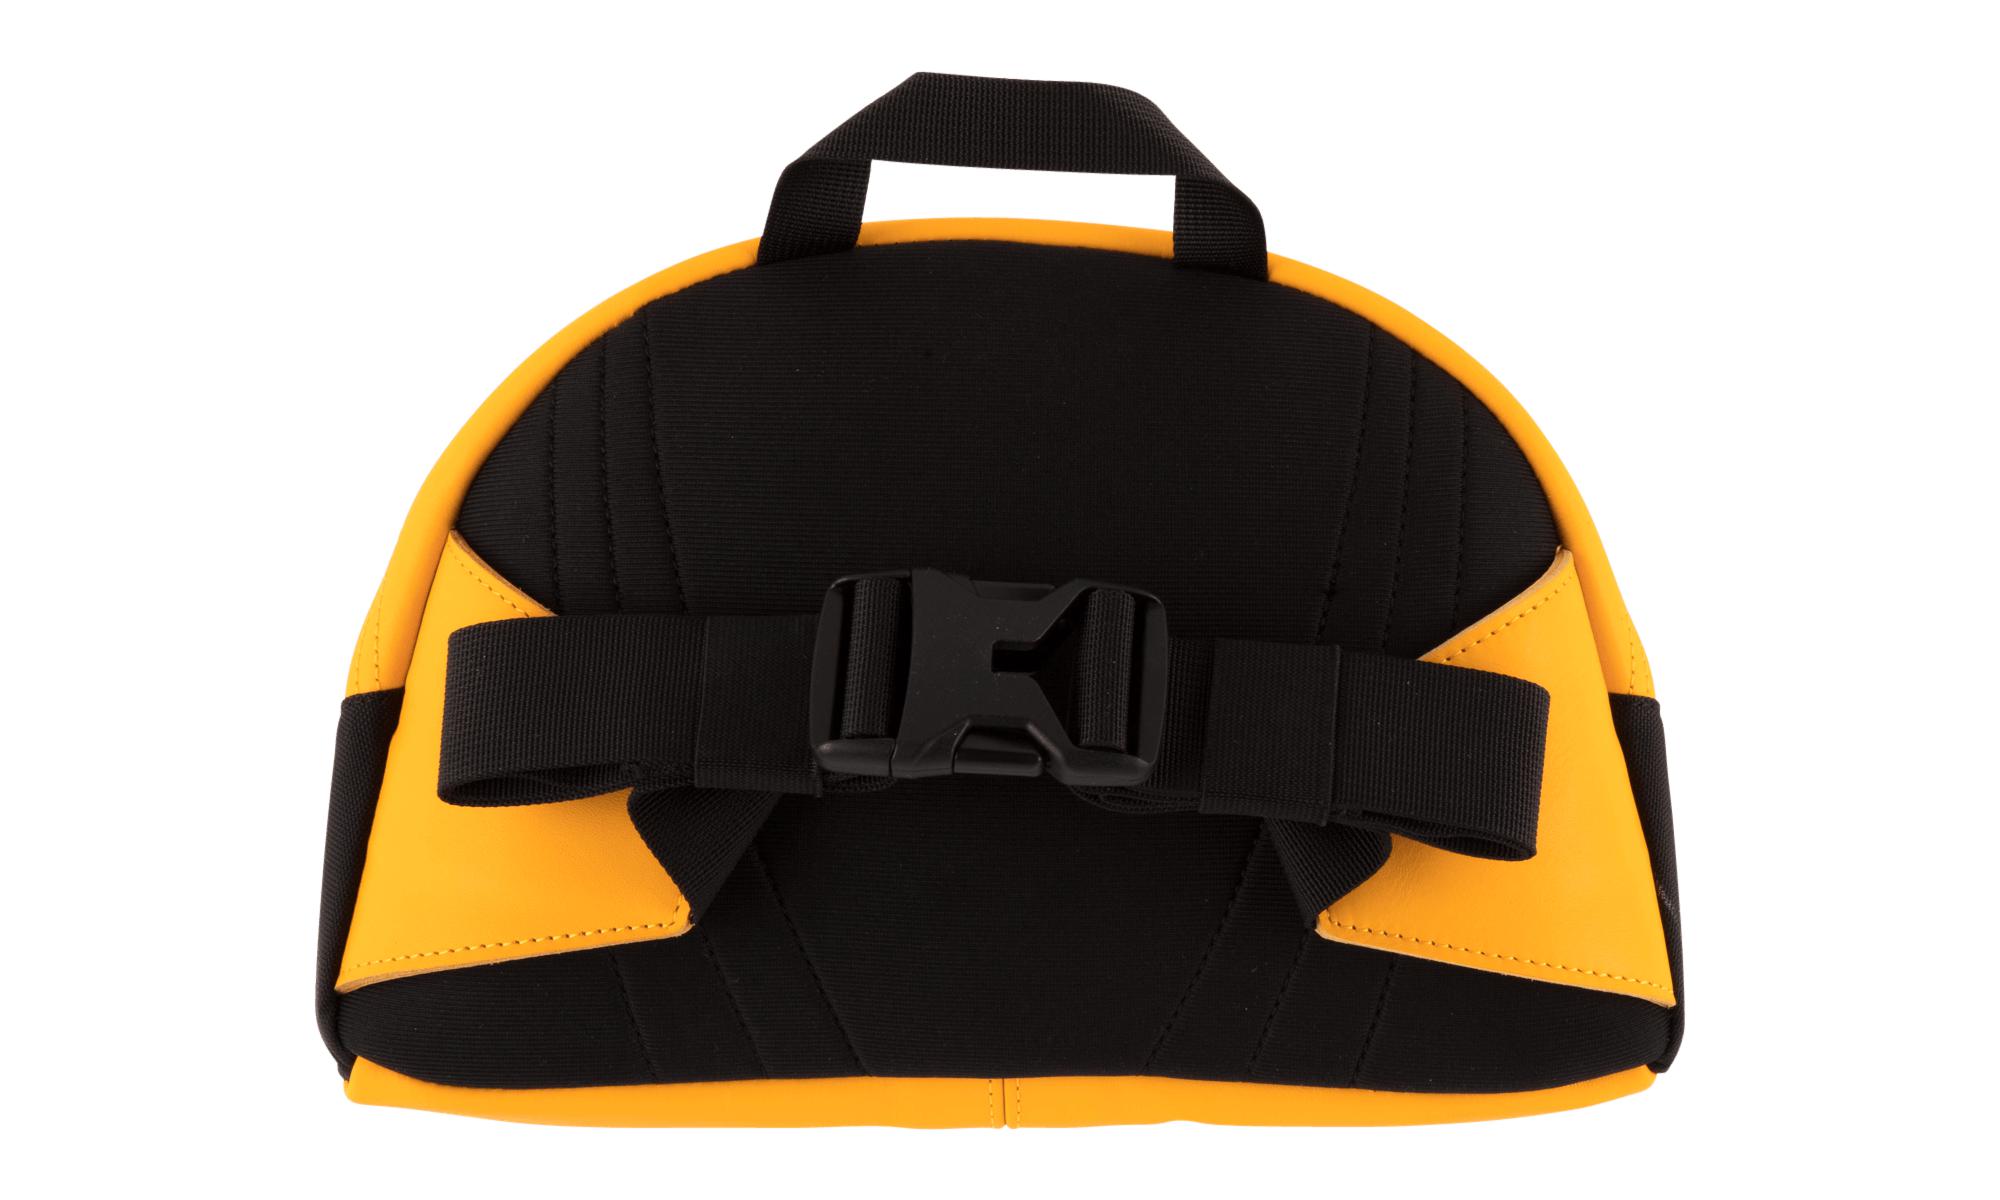 Supreme Tnf Leather Roo Waistbag in Yellow for Men - Lyst